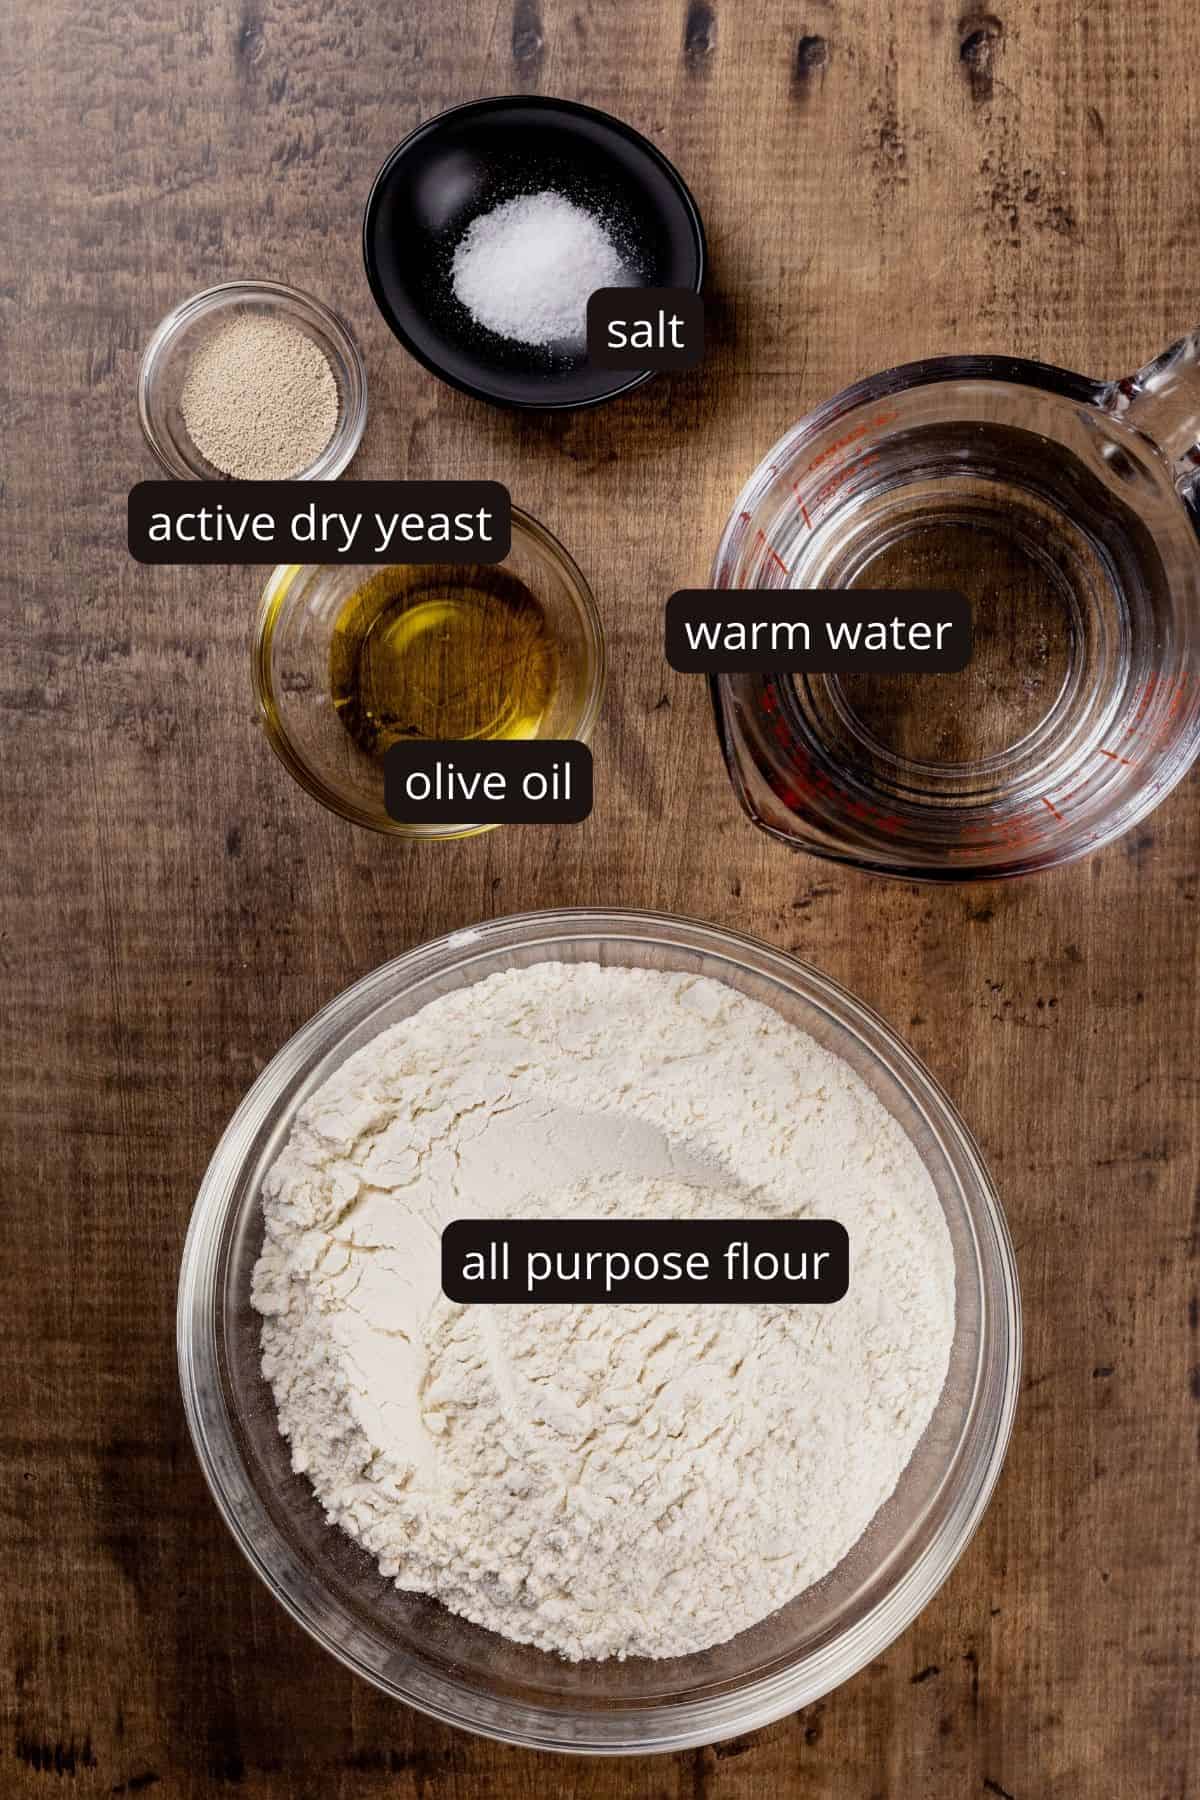 Ingredients for vegan pizza dough in various glass bowls on a wood tabletop. Black and white labels have been added to name each ingredient.